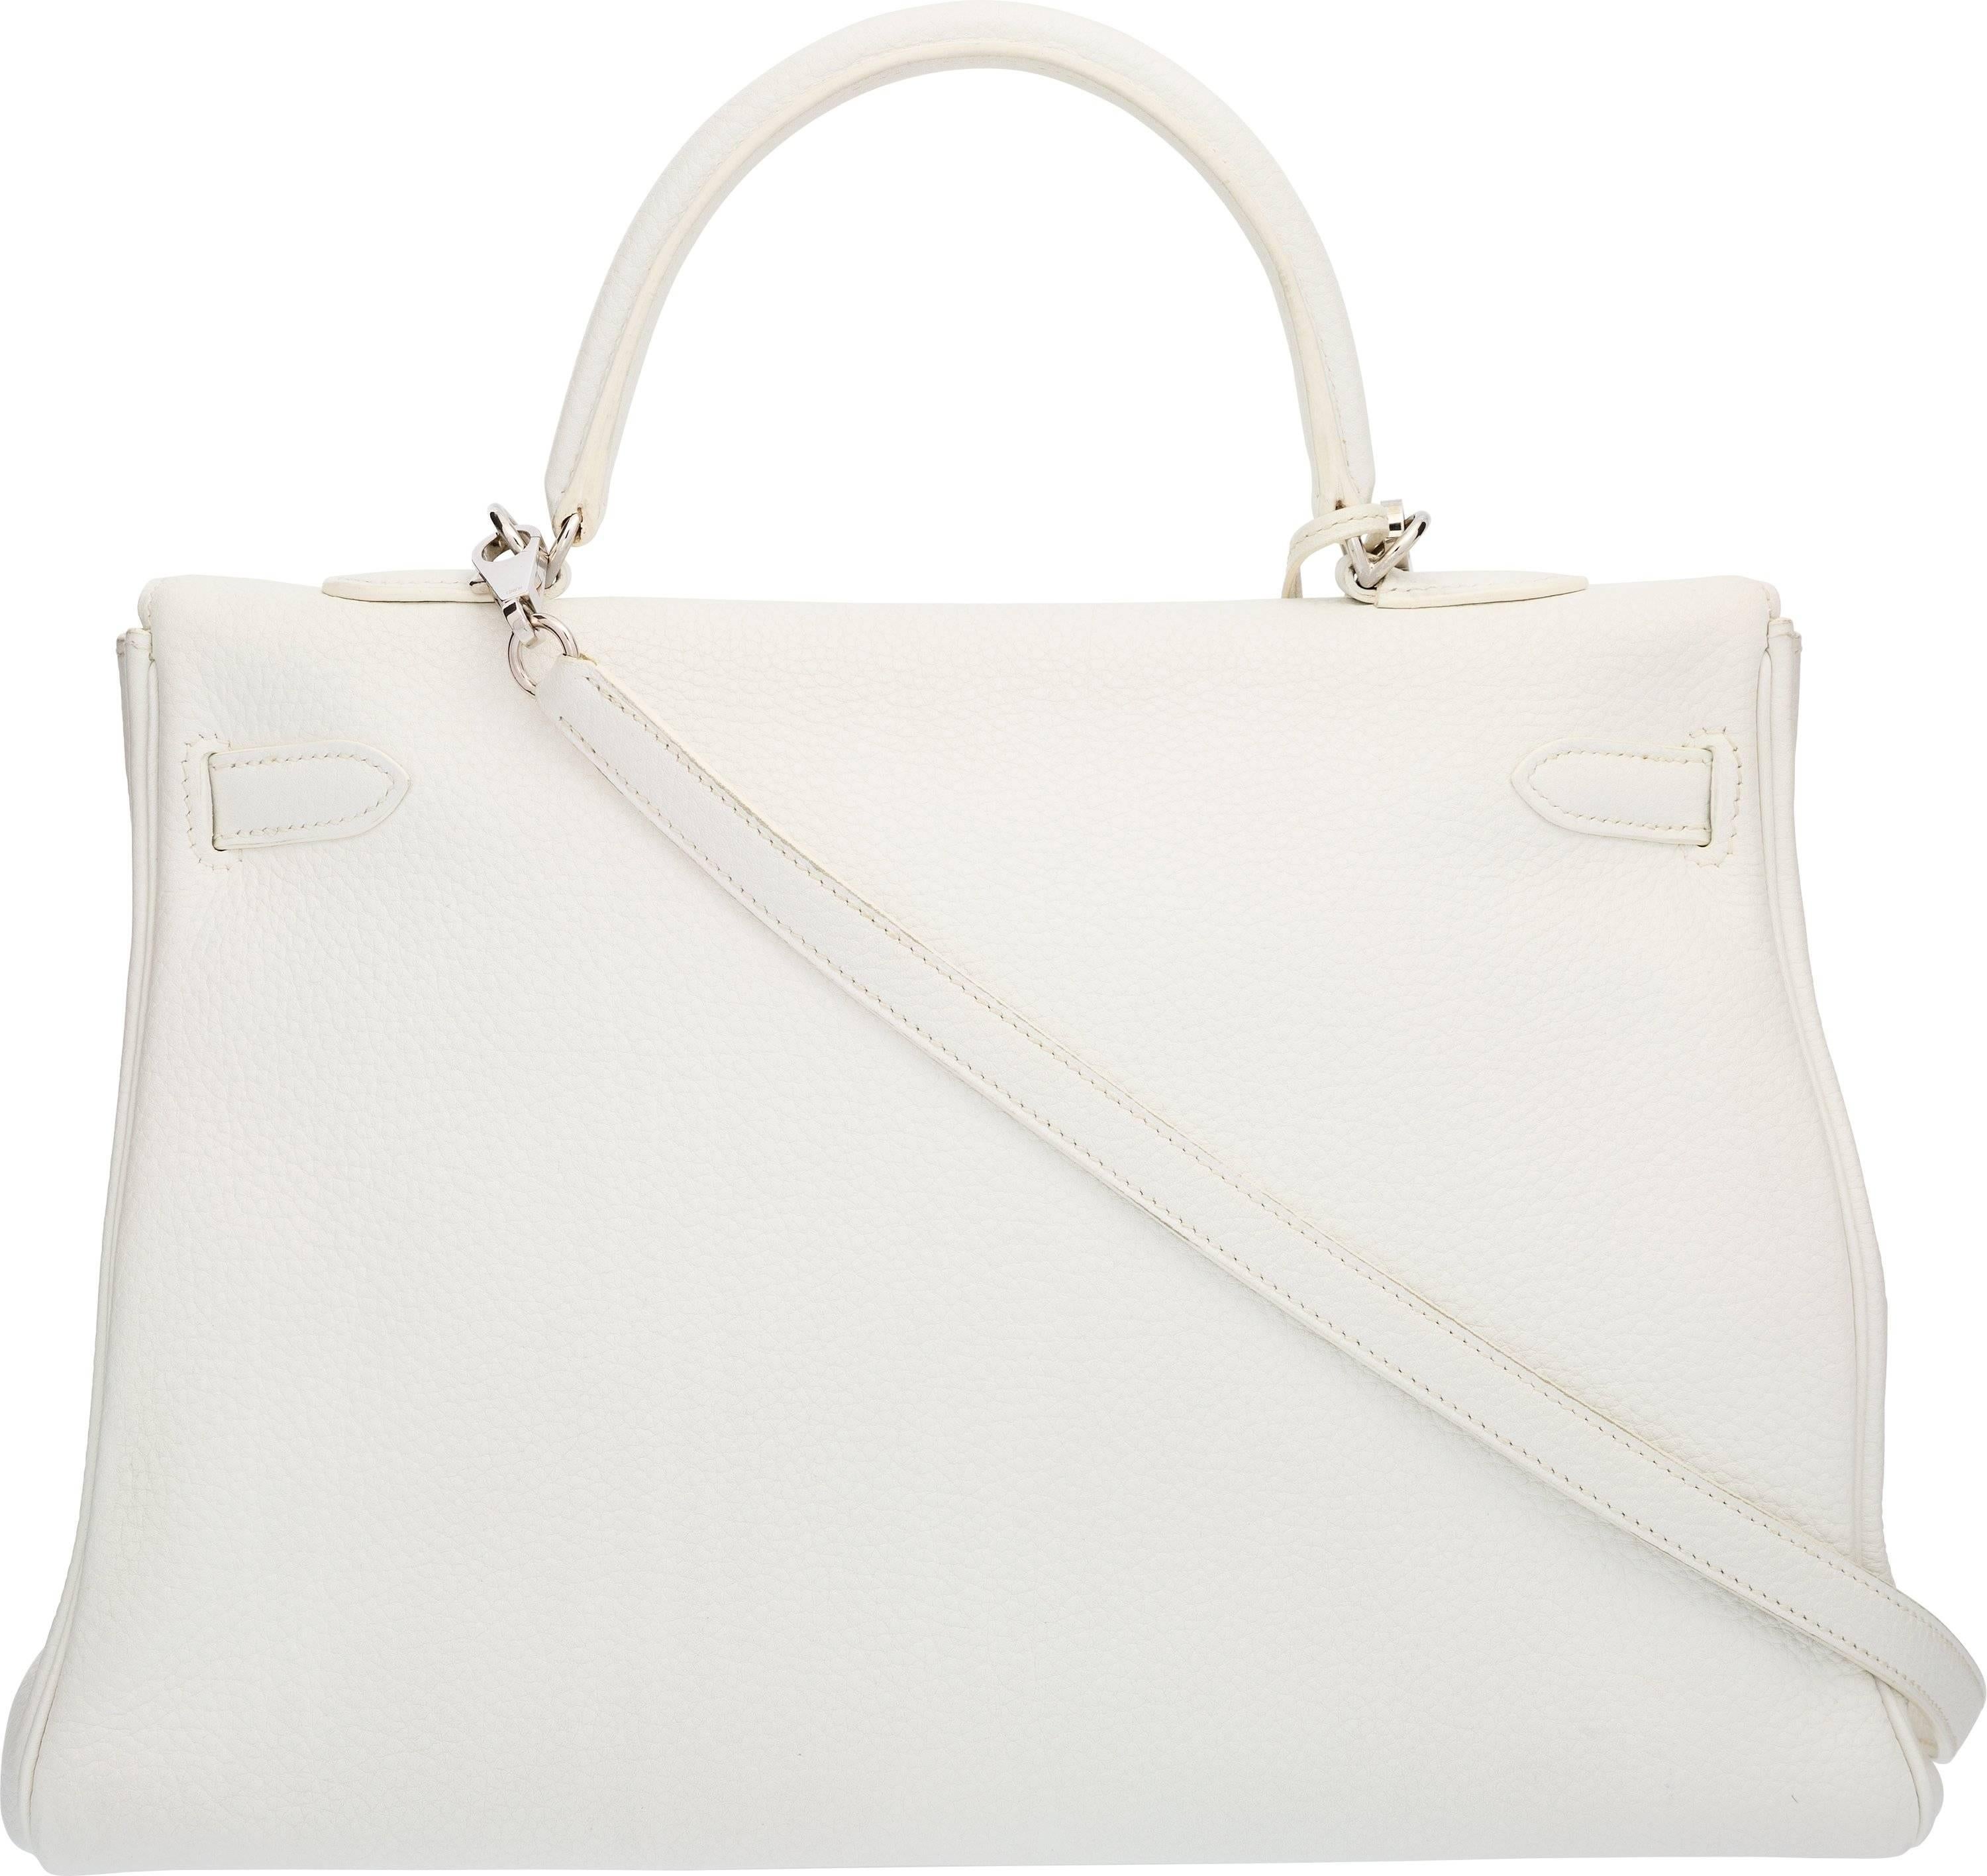 This Kelly bag is done in White Clemence Leather, featuring one top handle, one removable shoulder strap, Palladium Hardware, and a flap top with a turnlock closure. The interior is done in matching White Chevre Leather, featuring one zip pocket and